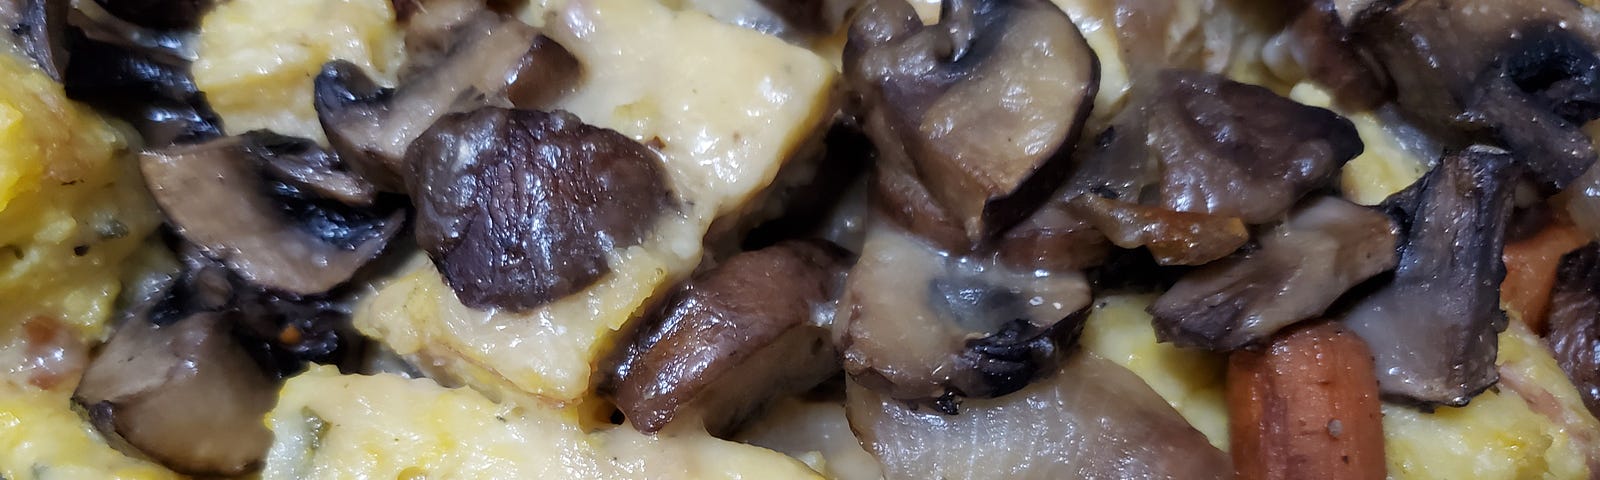 Close up of cubed polenta with sliced mushrooms, caramelized onions and baby carrots.